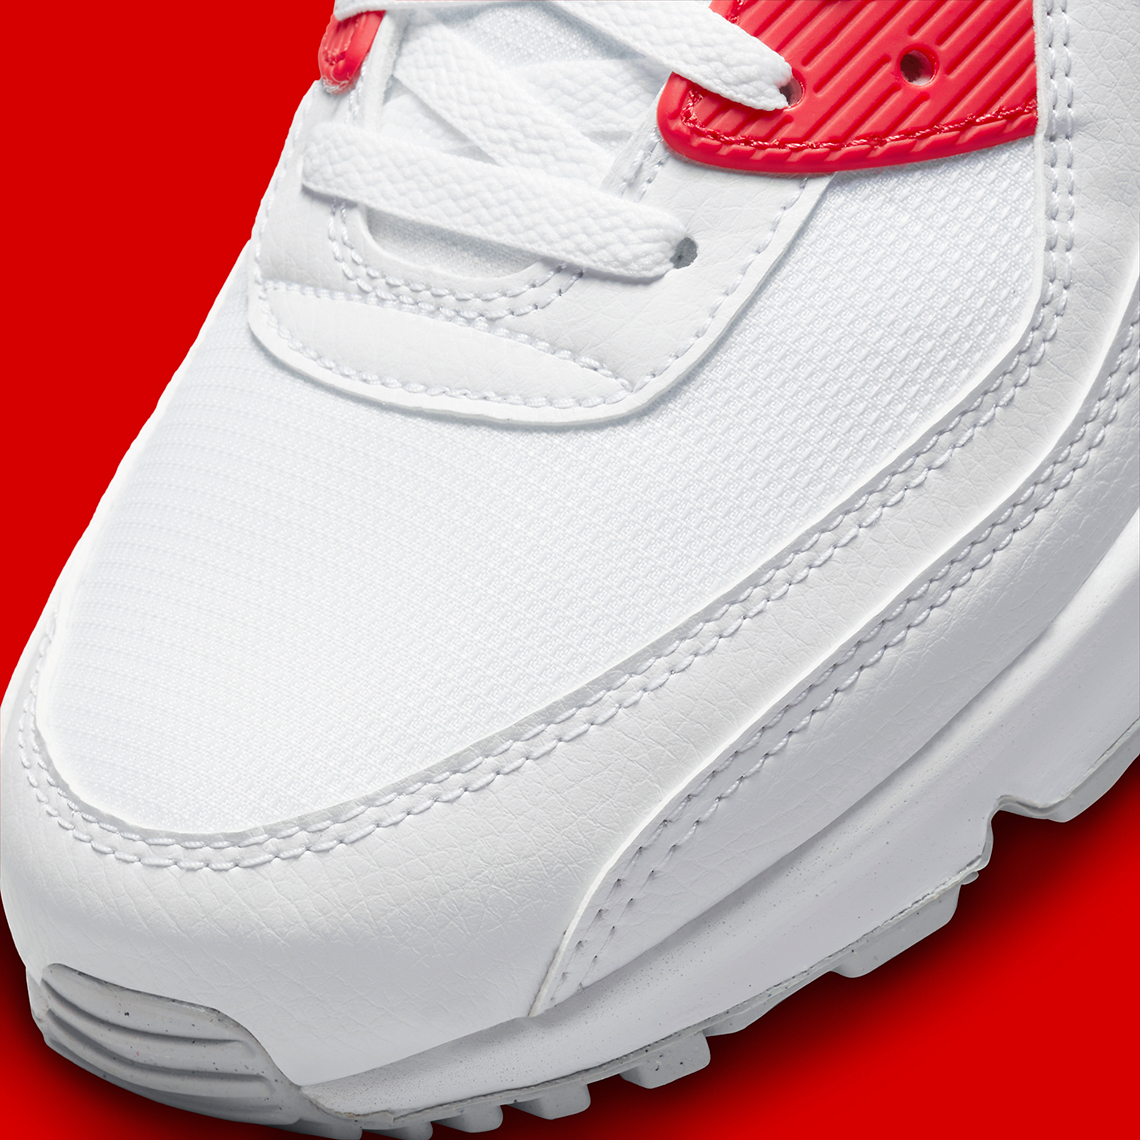 Nike Air Max 90 White Red Grey Dx8966 100 1